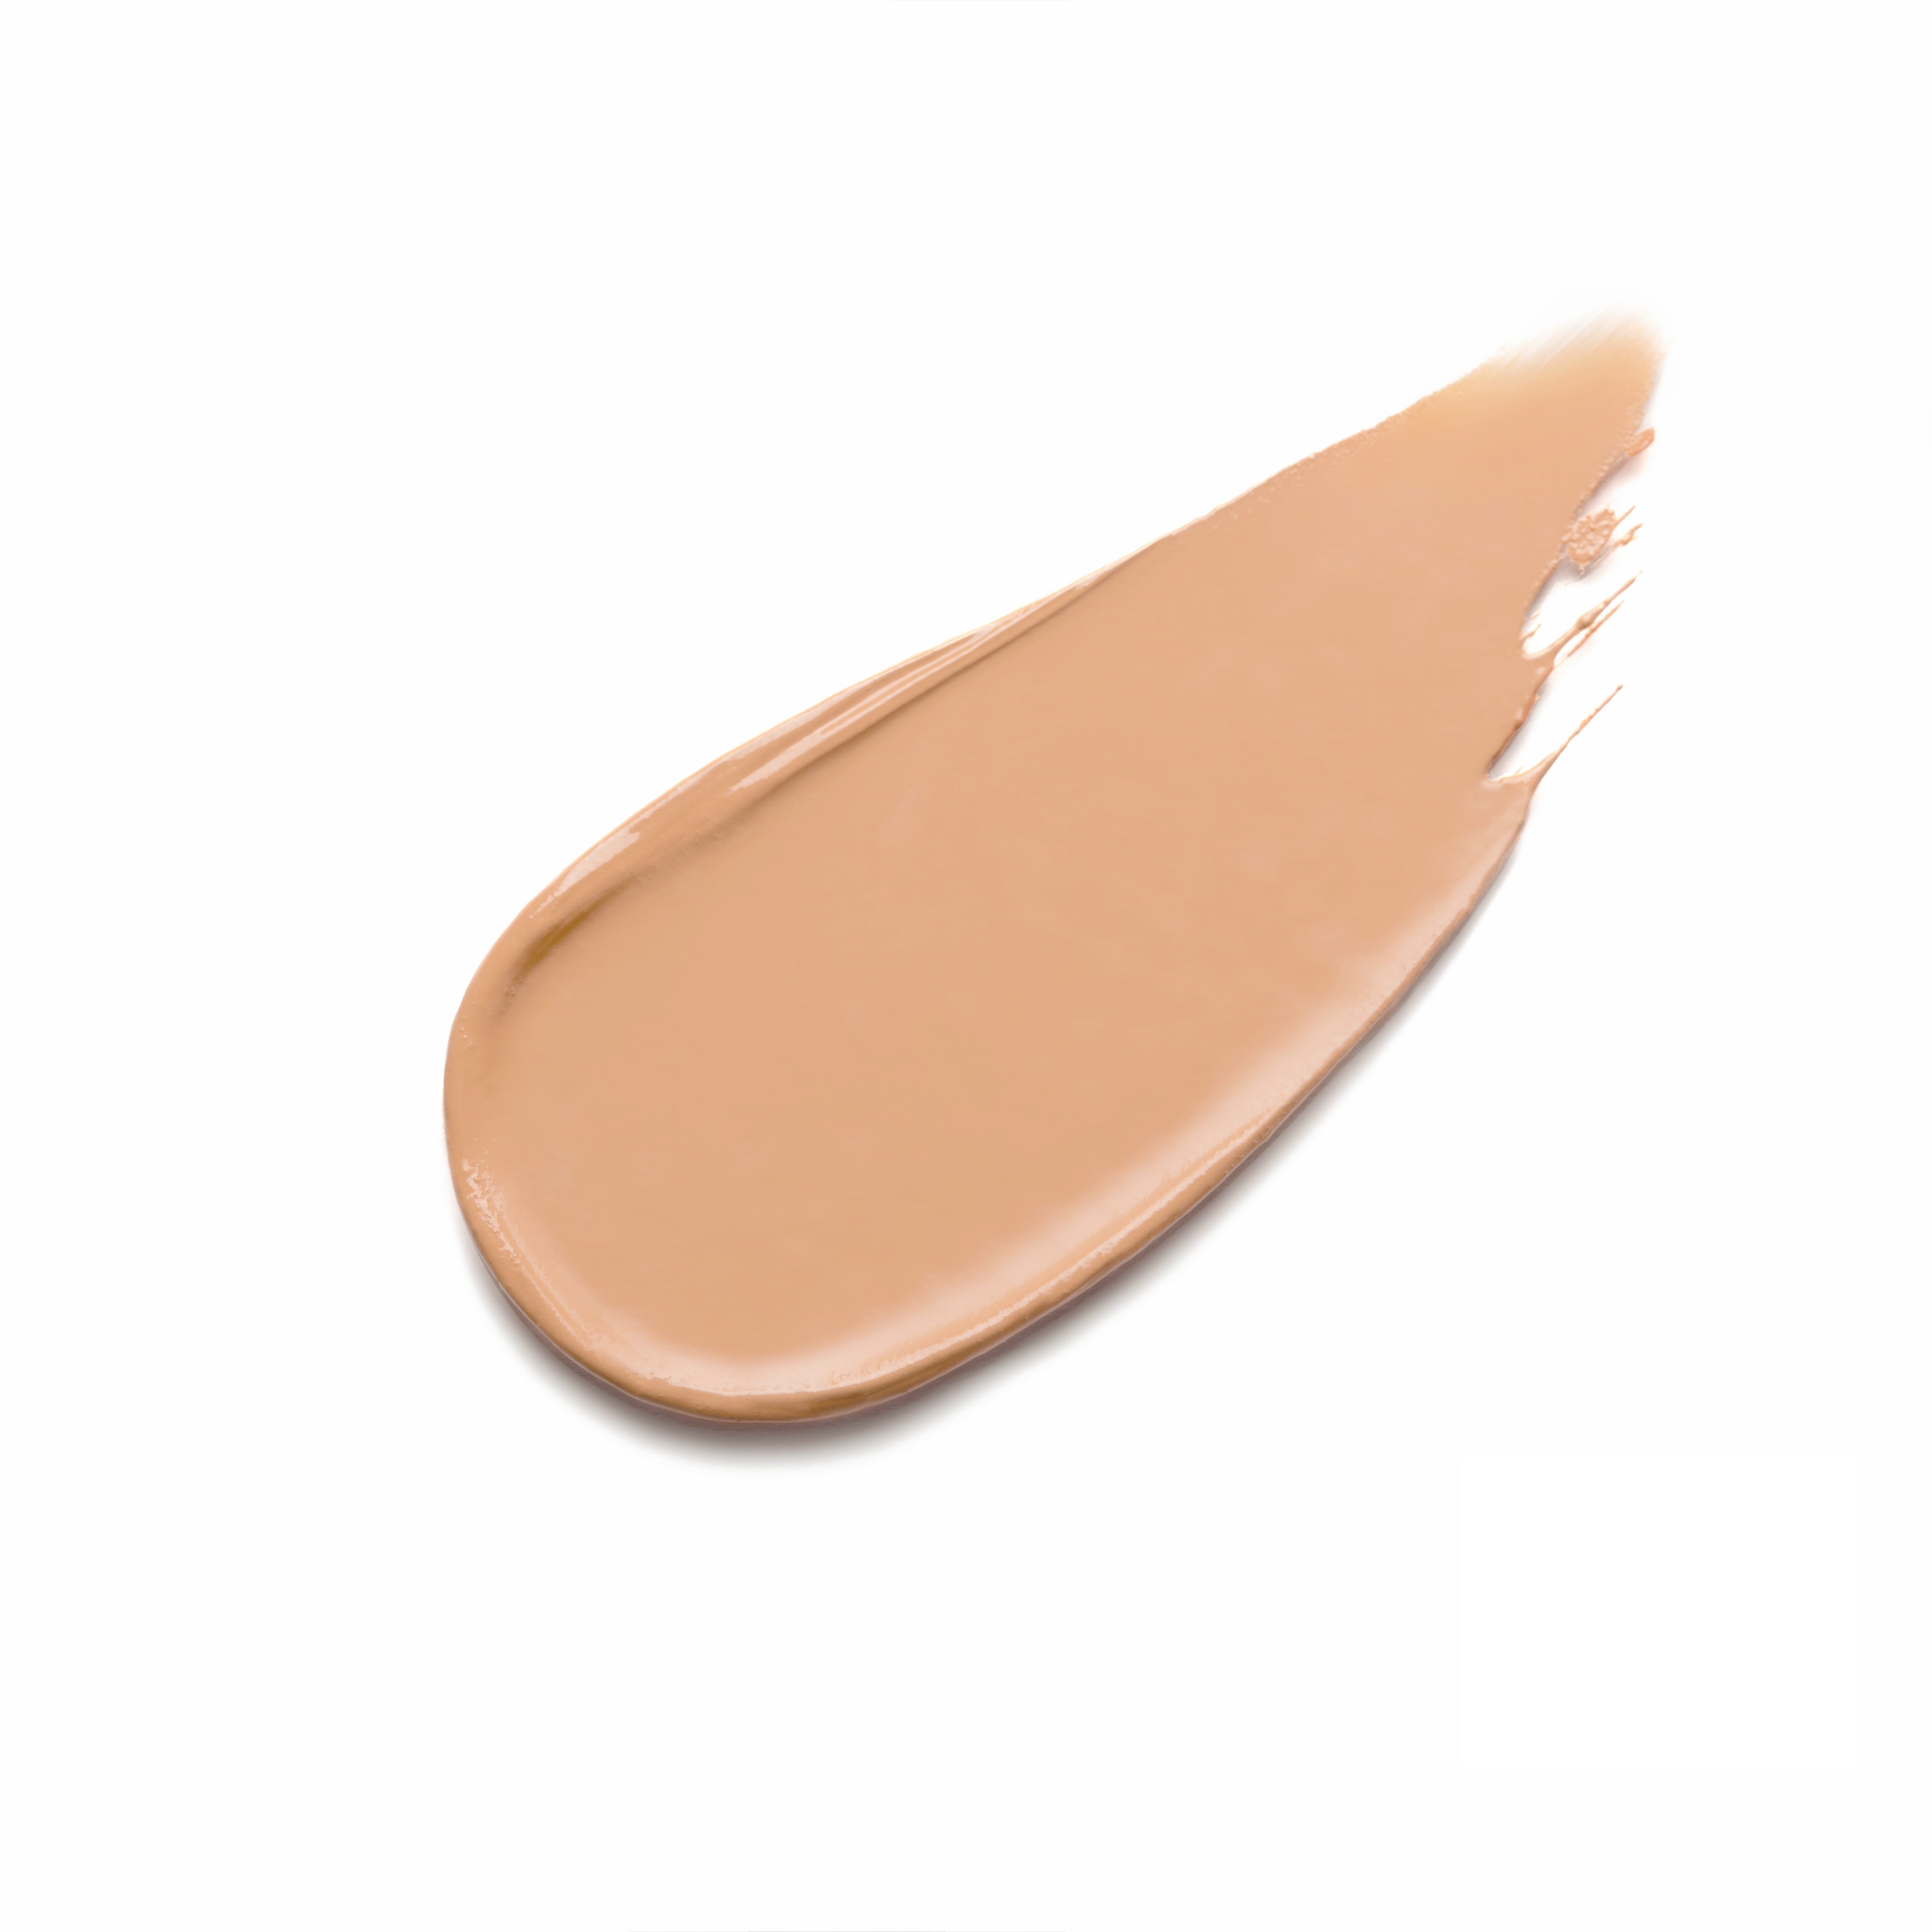 Faces Canada Ultime Pro HD Concealer (3.8ml) Faces Canada